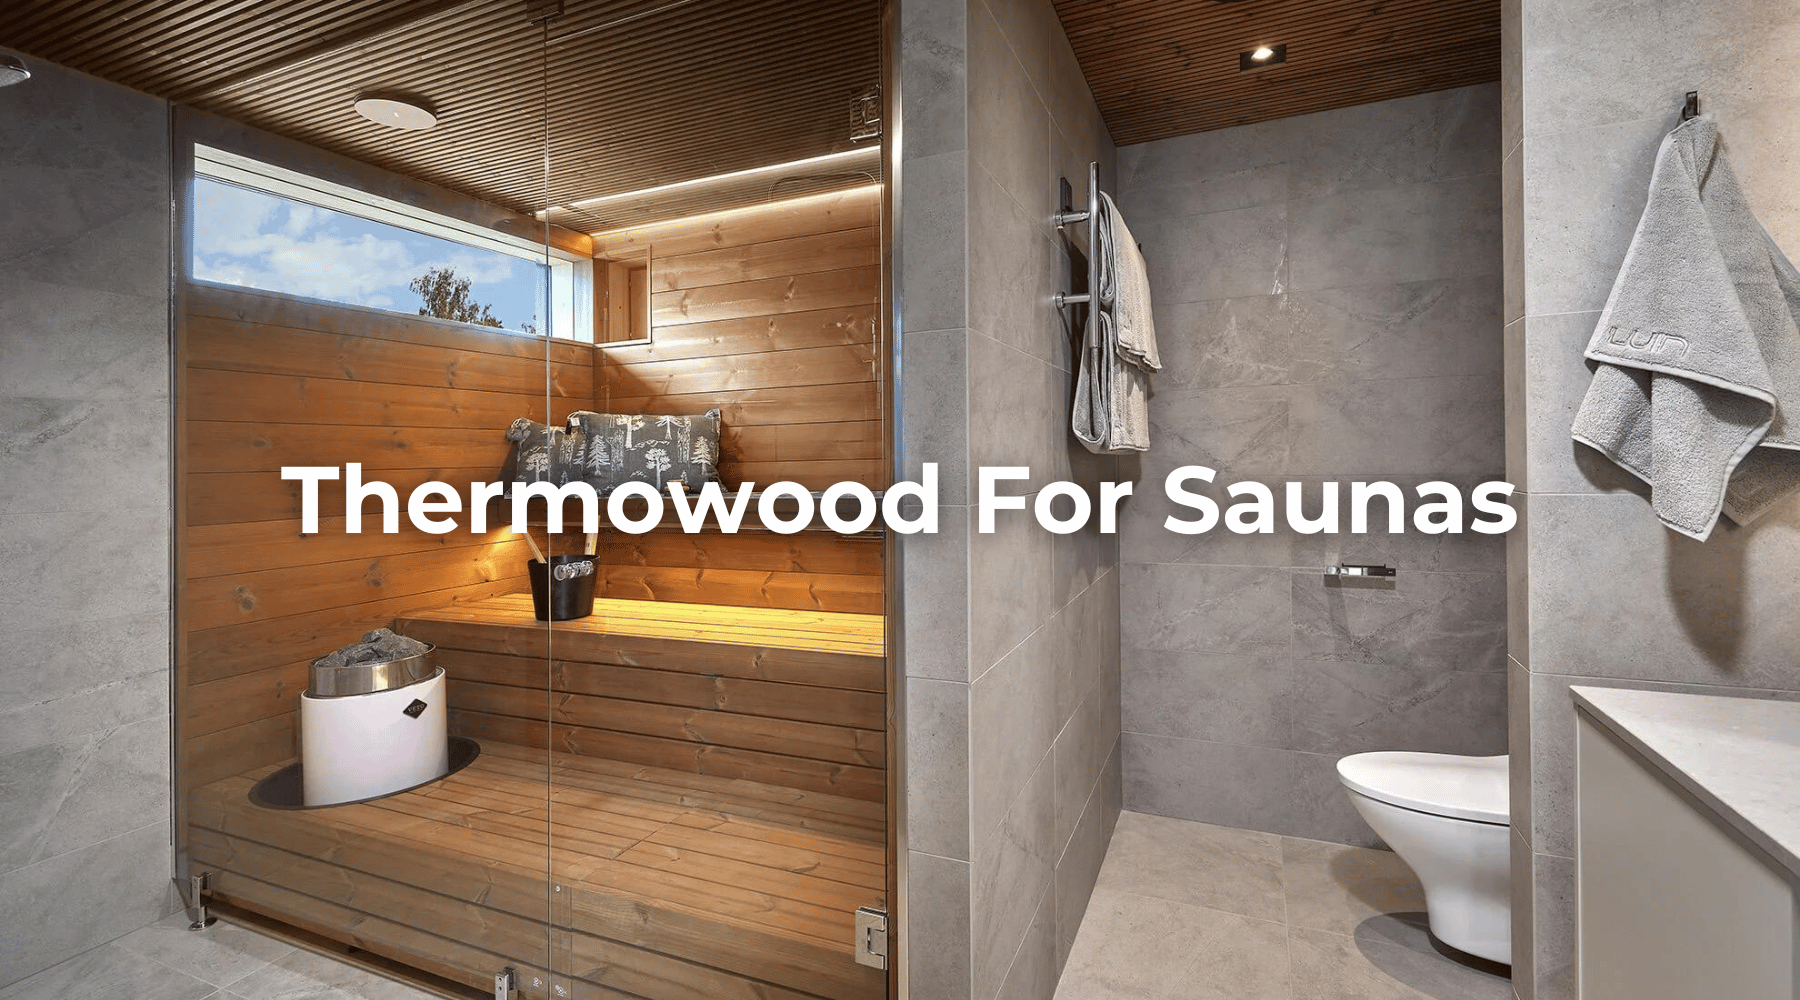 Why Thermowood is the Best Wood for Saunas